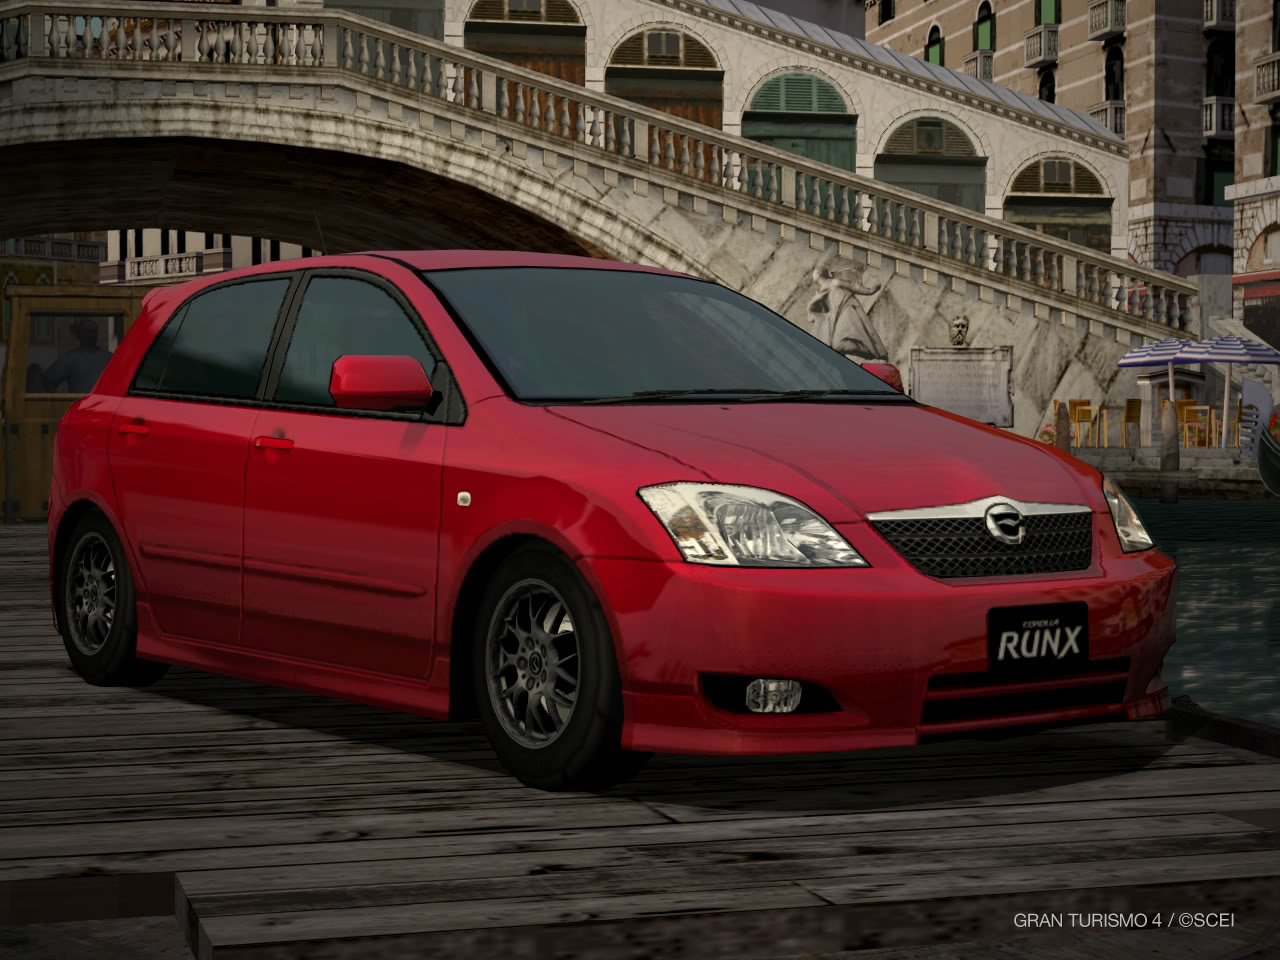 Toyota Runx Z, prices, ratings with various photo